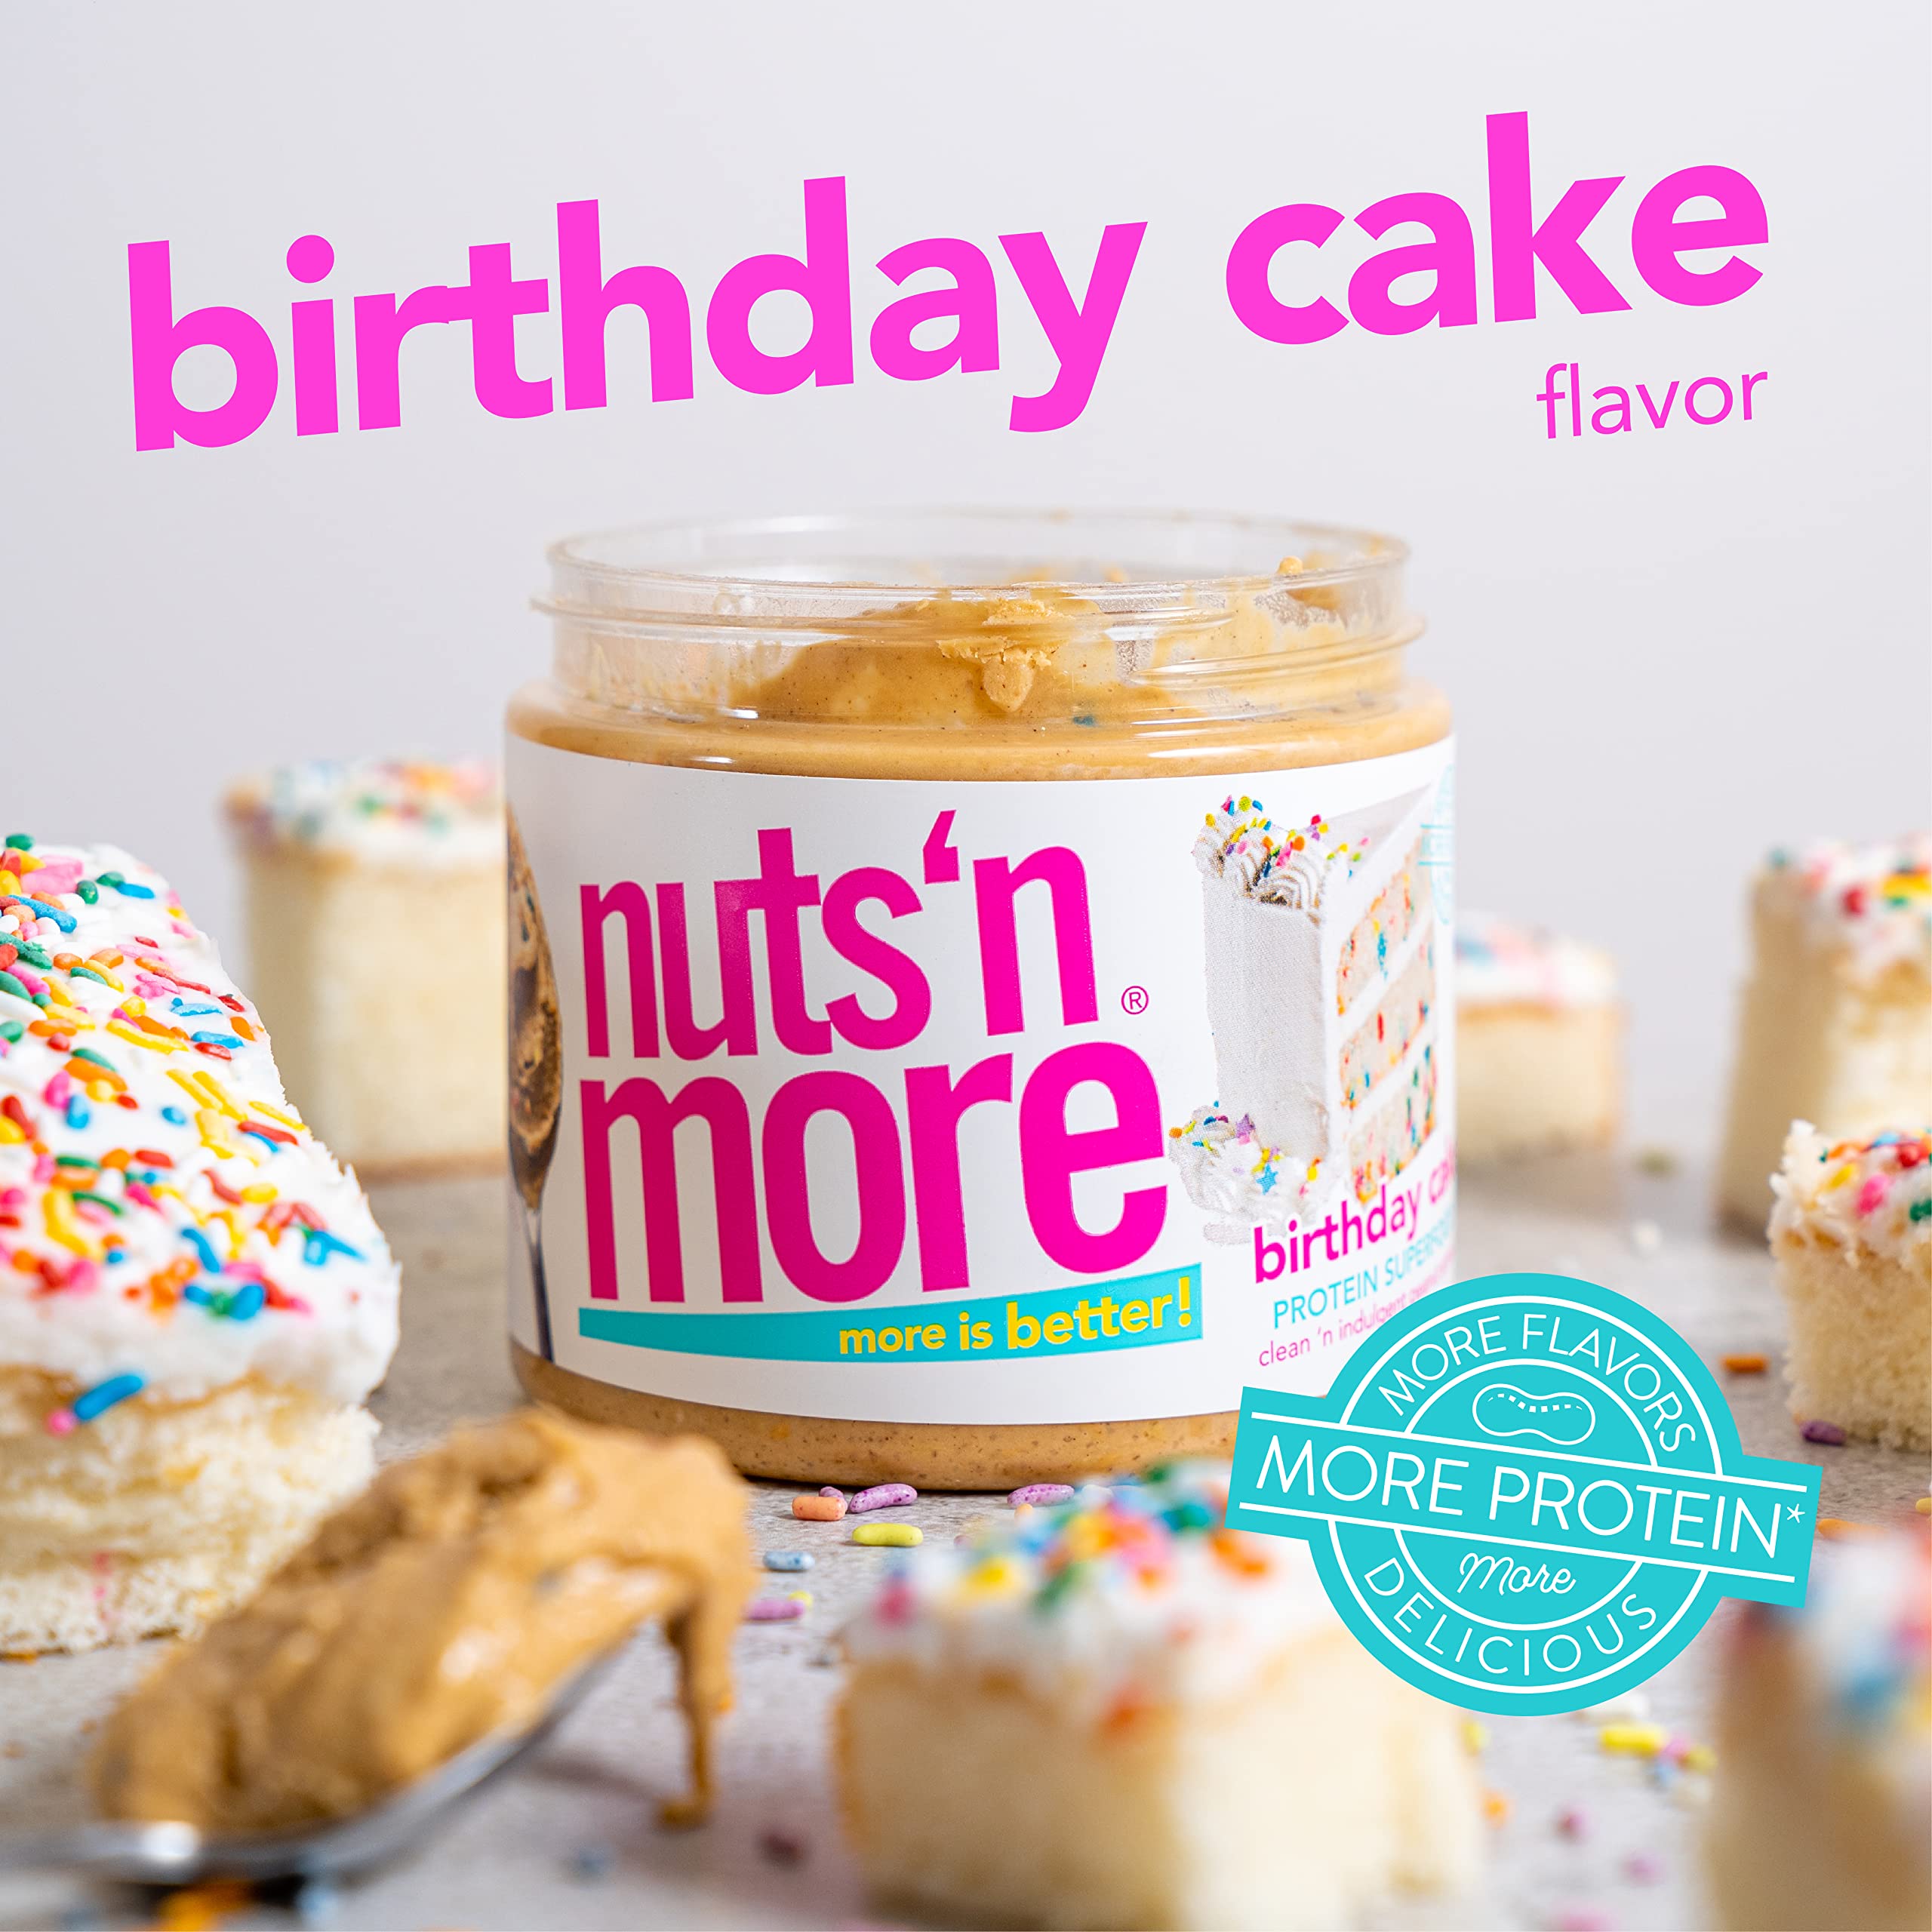 Nuts ‘N More Birthday Cake Peanut Butter Spread, Added Protein All Natural Snack, Low Carb, Low Sugar, Gluten Free, Non-GMO, High Protein Flavored Nut Butter (15 oz Jar)